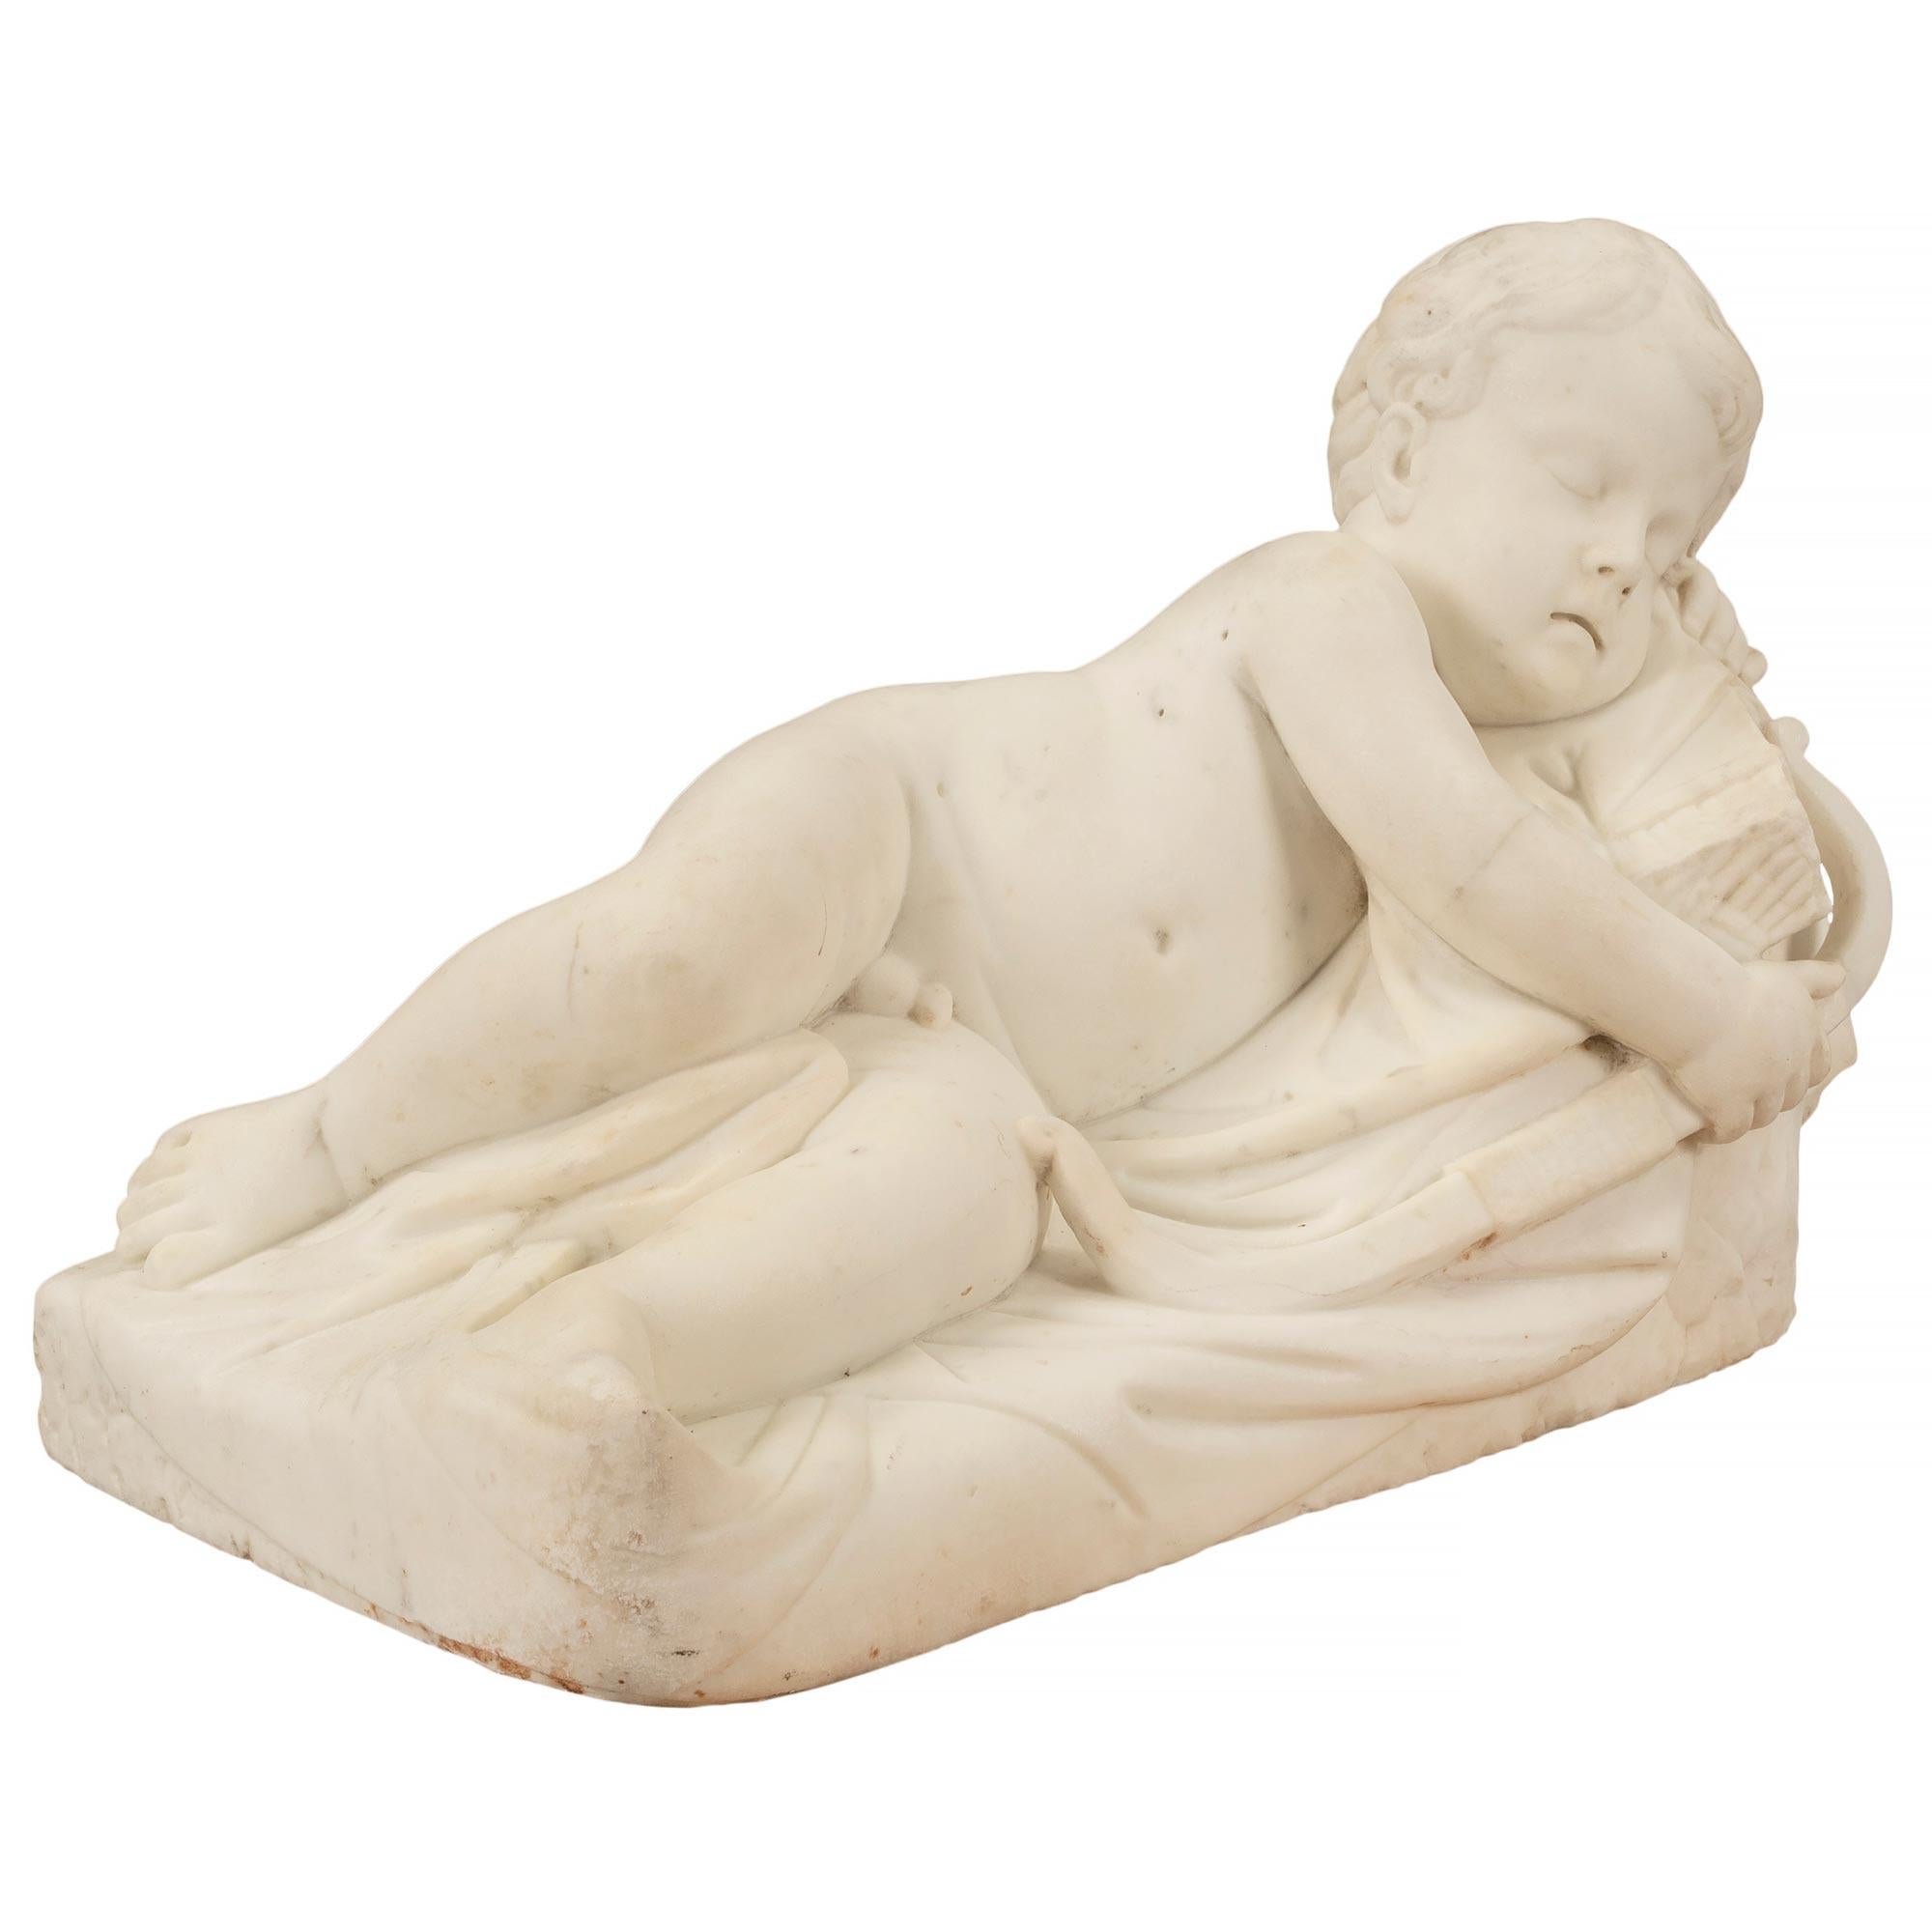 A charming Italian 19th century white Carrara marble statue of sleeping Cupid. The statue is raised by a terrain designed base where the richly sculpted Cupid sleeps. He lays on a wonderfully executed blanket with his head resting gently on a rock.